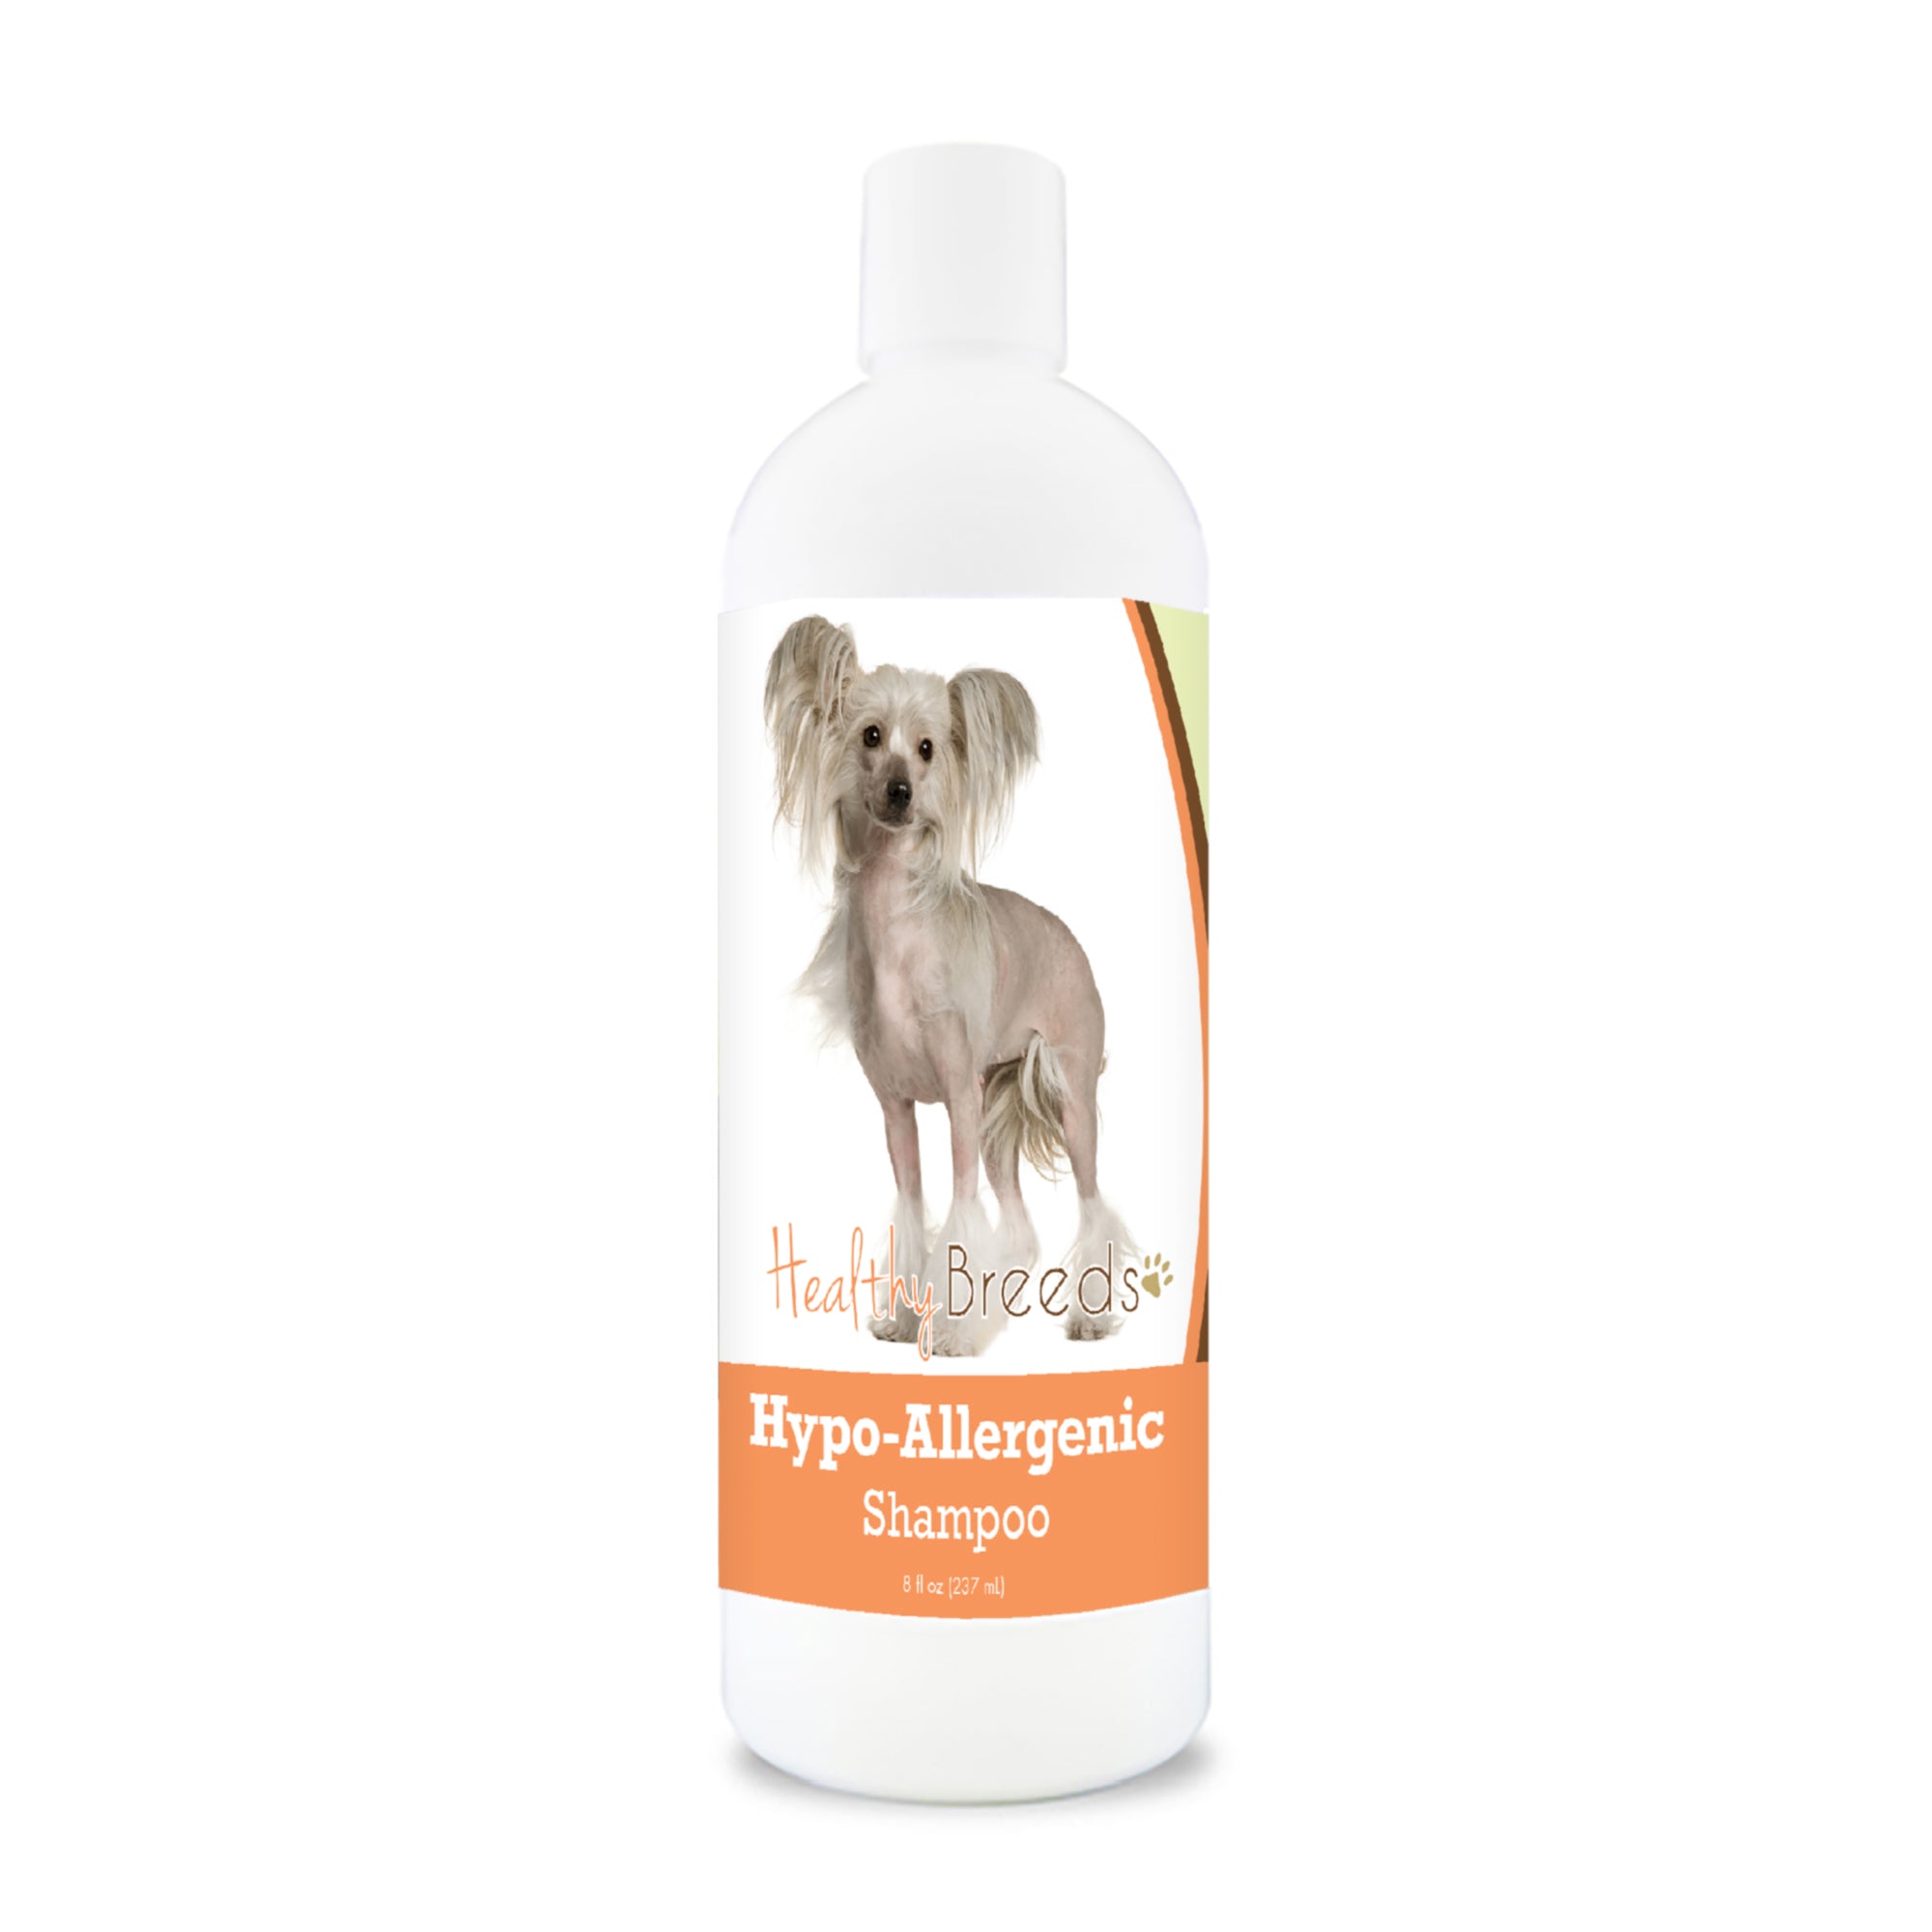 Chinese Crested Hypo-Allergenic Shampoo 8 oz